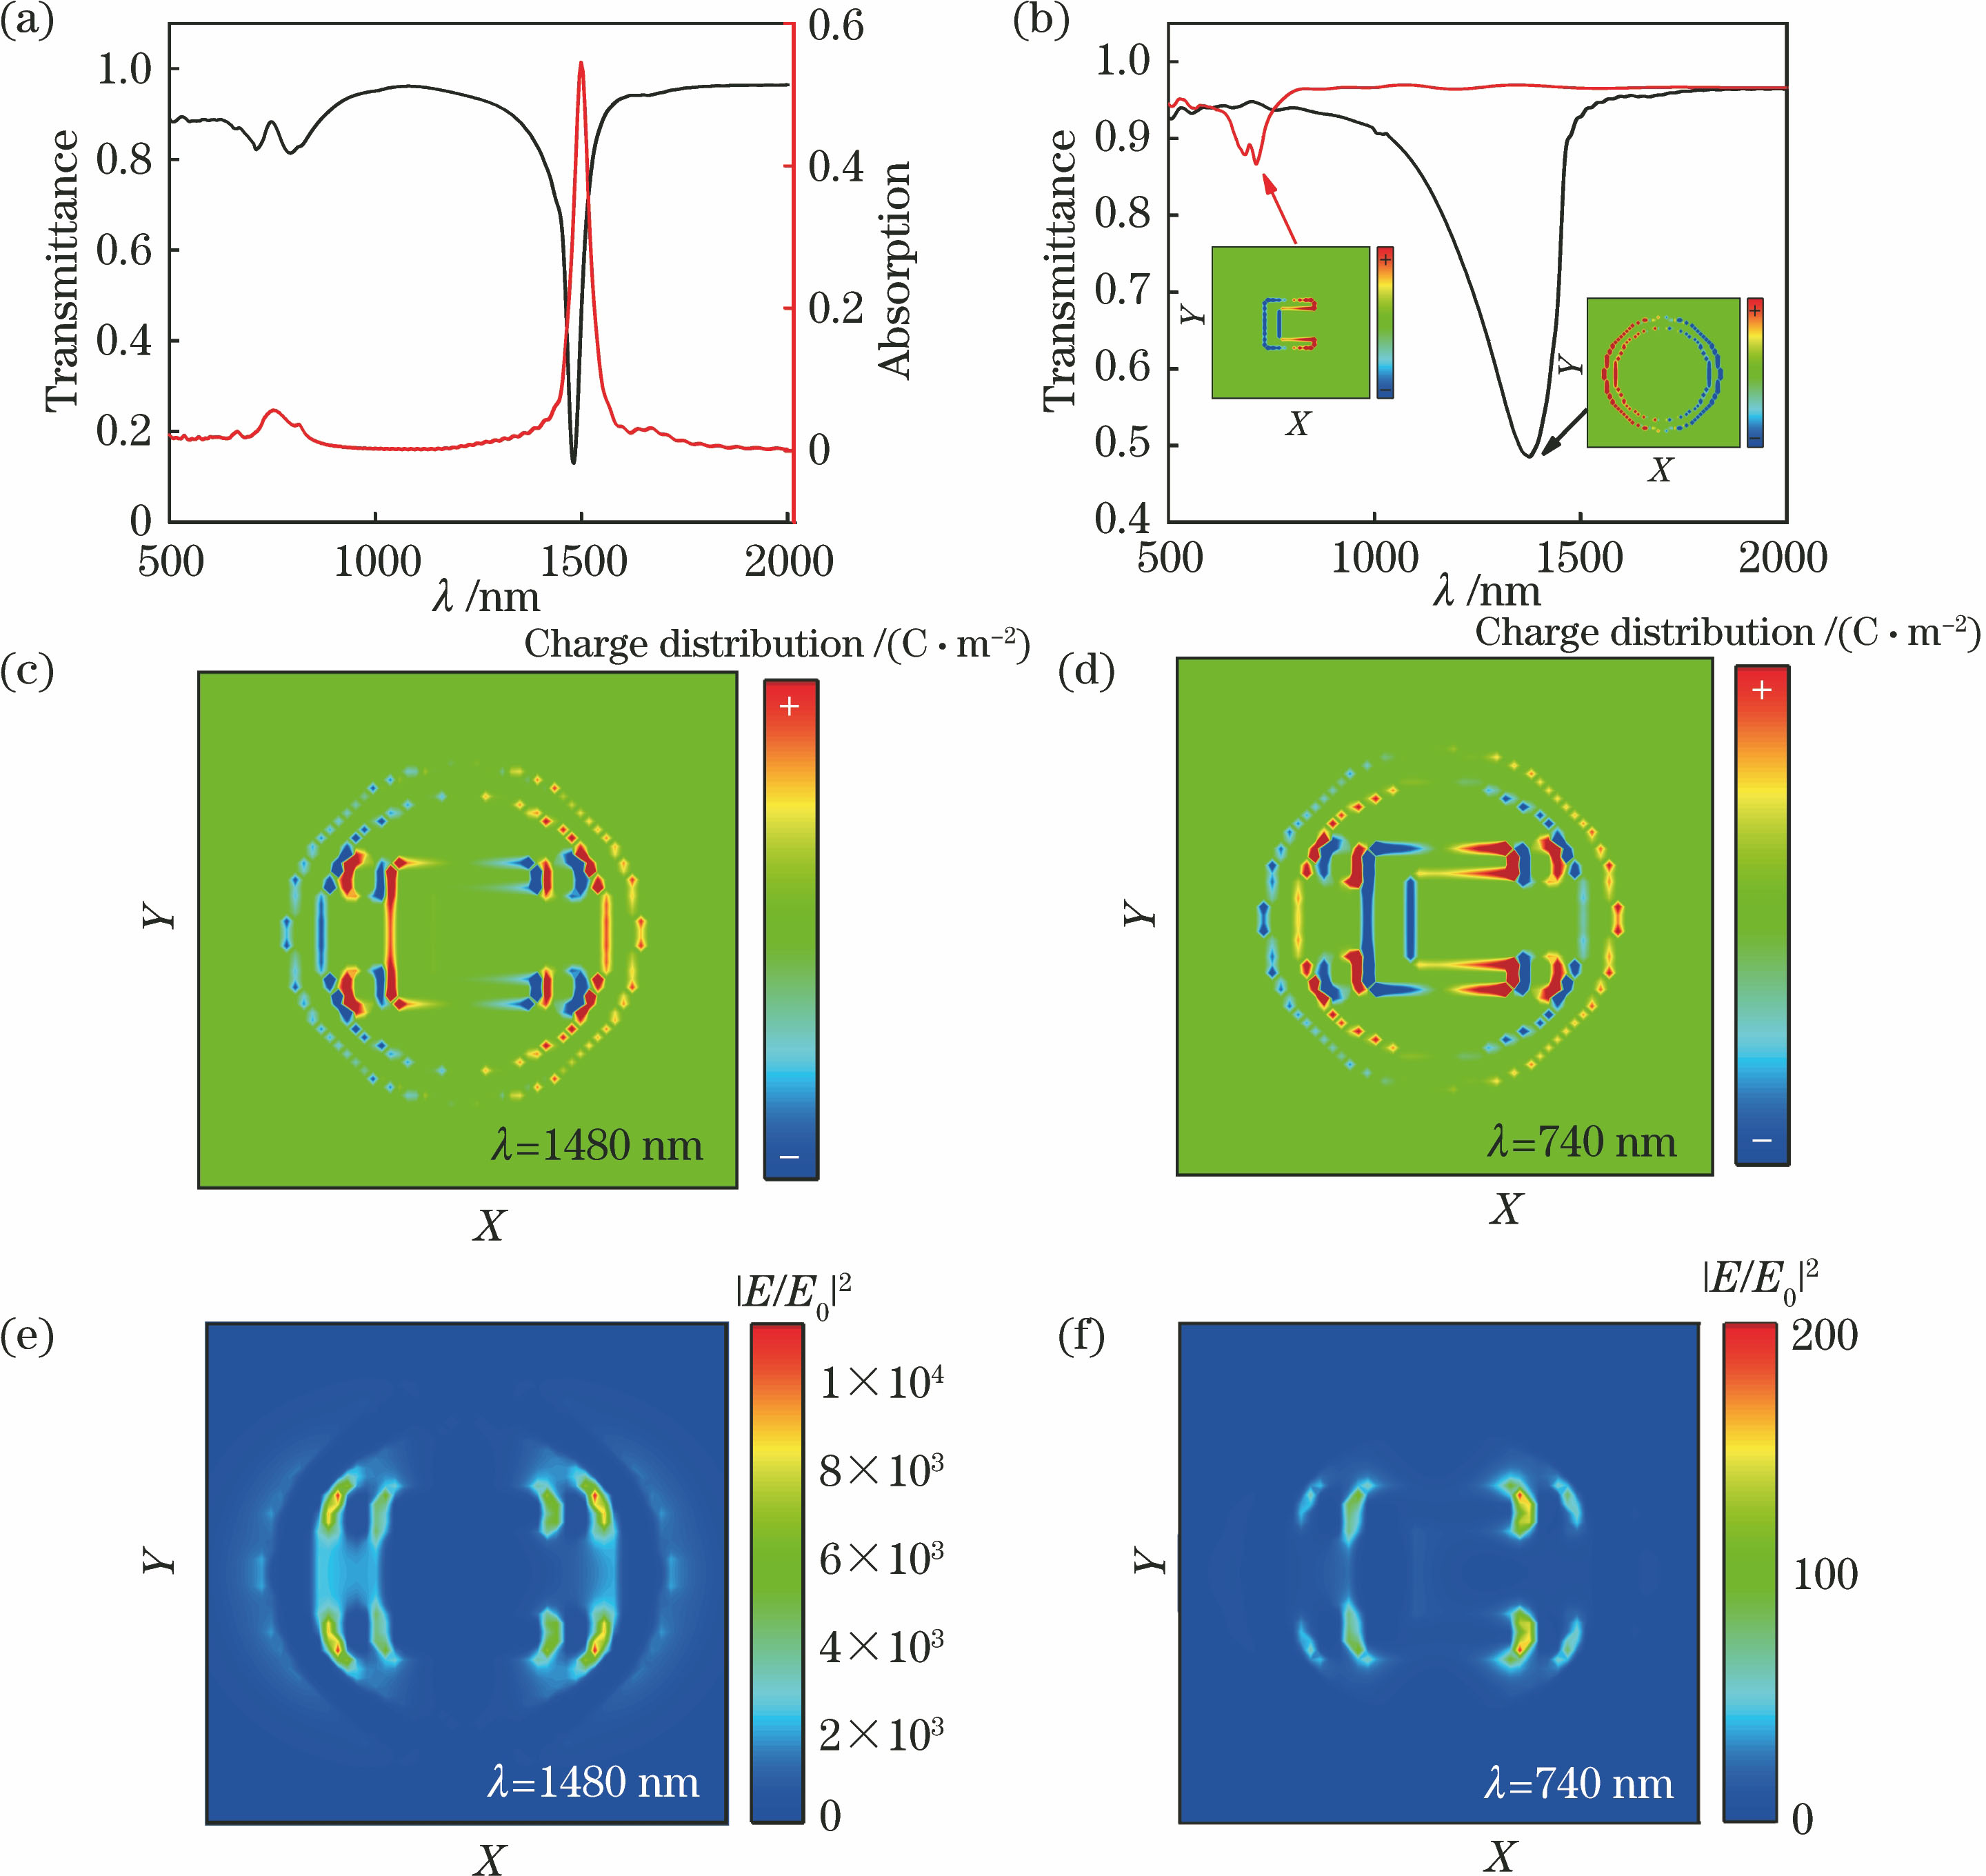 Simulation results. (a) Transmission and absorption spectra of the metasurface; (b) transmittances of the metasurfaces consisting of the meta-atoms with a single Au ring and a single Au SRR; (c)(d) charge distributions of the meta-atom at the wavelengths of 1480 nm and 740 nm, respectively; (e)(f) near-field enhancements of the meta-atom at the wavelengths of 1480 nm and 740 nm, respectively